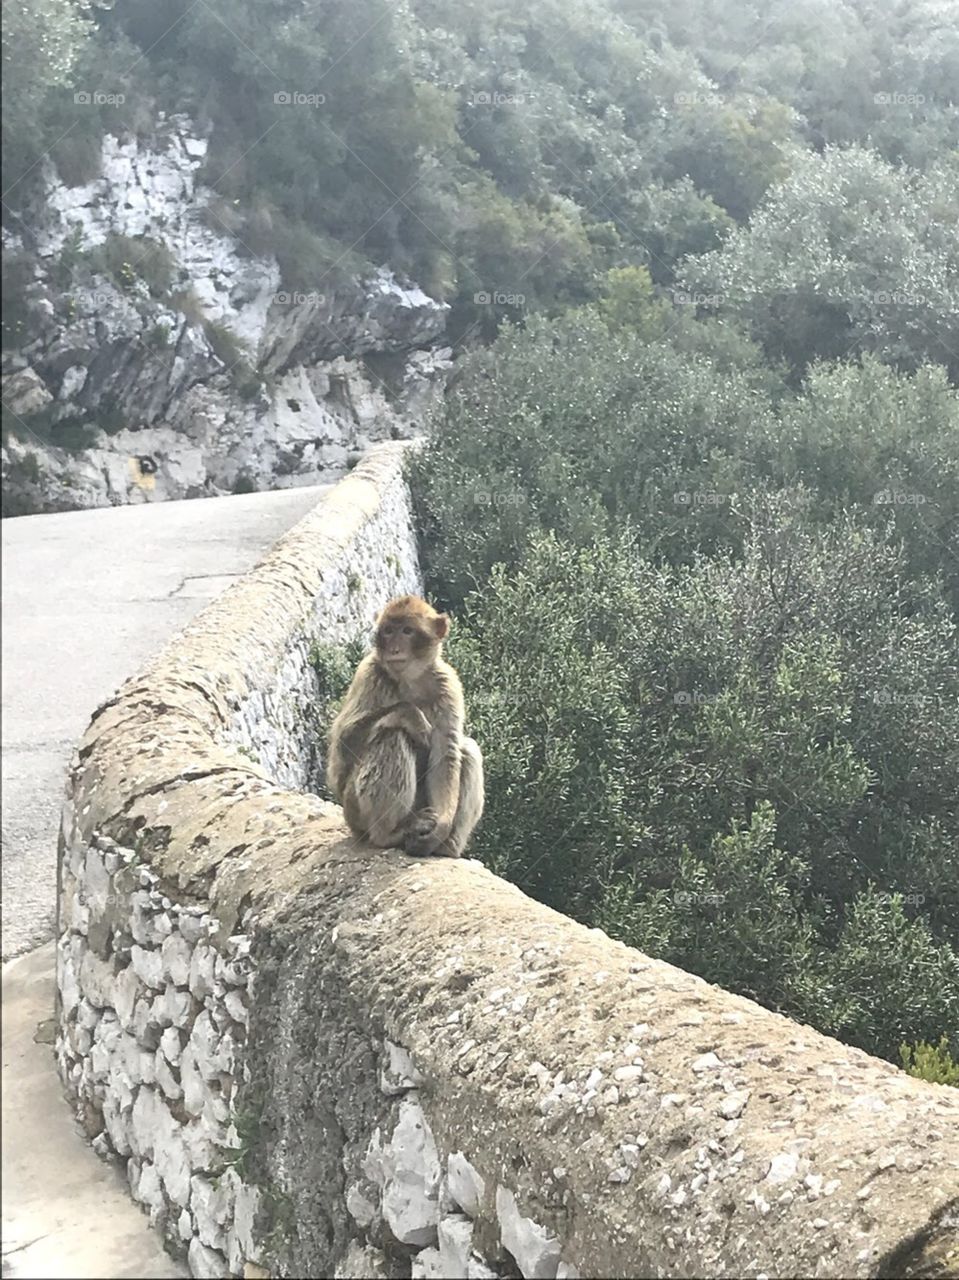 Monkey on a ledge in Gibraltar with Mountain View.